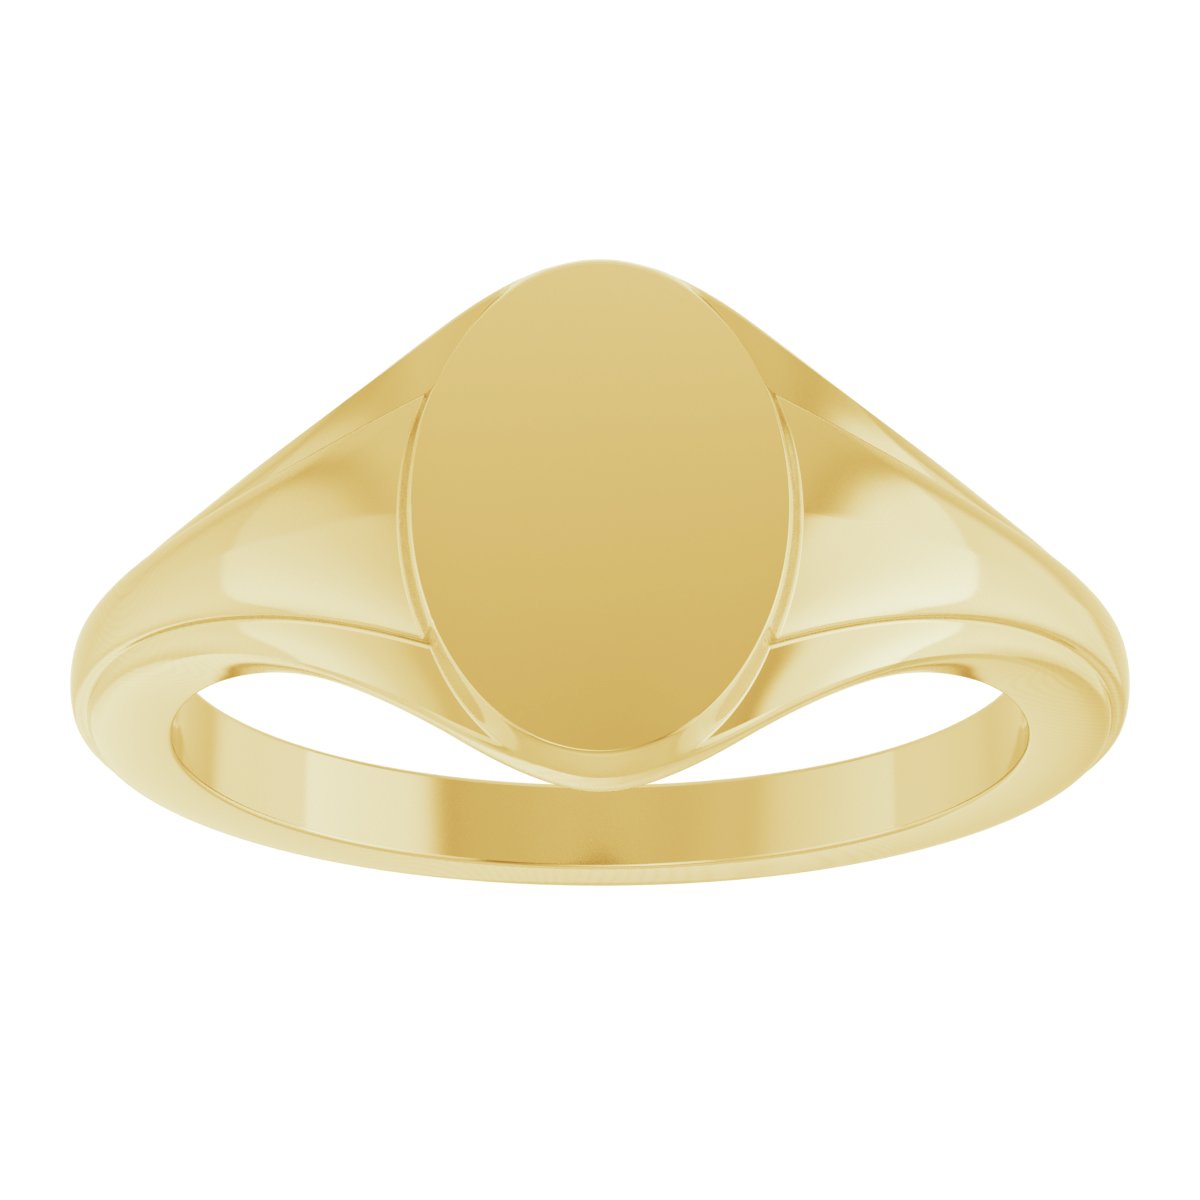 14K Yellow 10.4x7.1 mm Oval Fluted Signet Ring